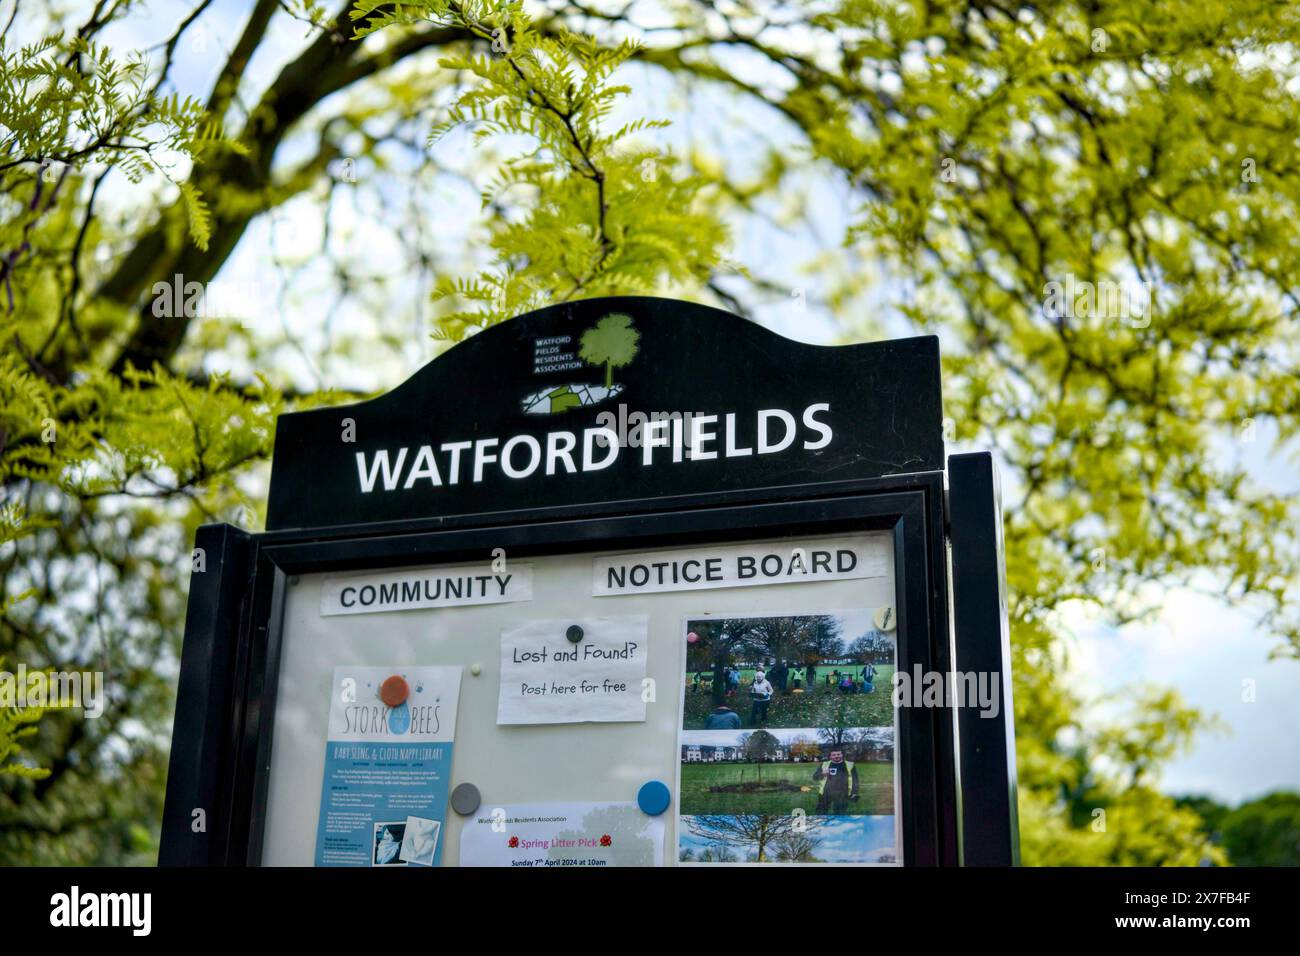 Watford Fields open space, Watford, Hertfordshire, Angleterre, Royaume-Uni Banque D'Images